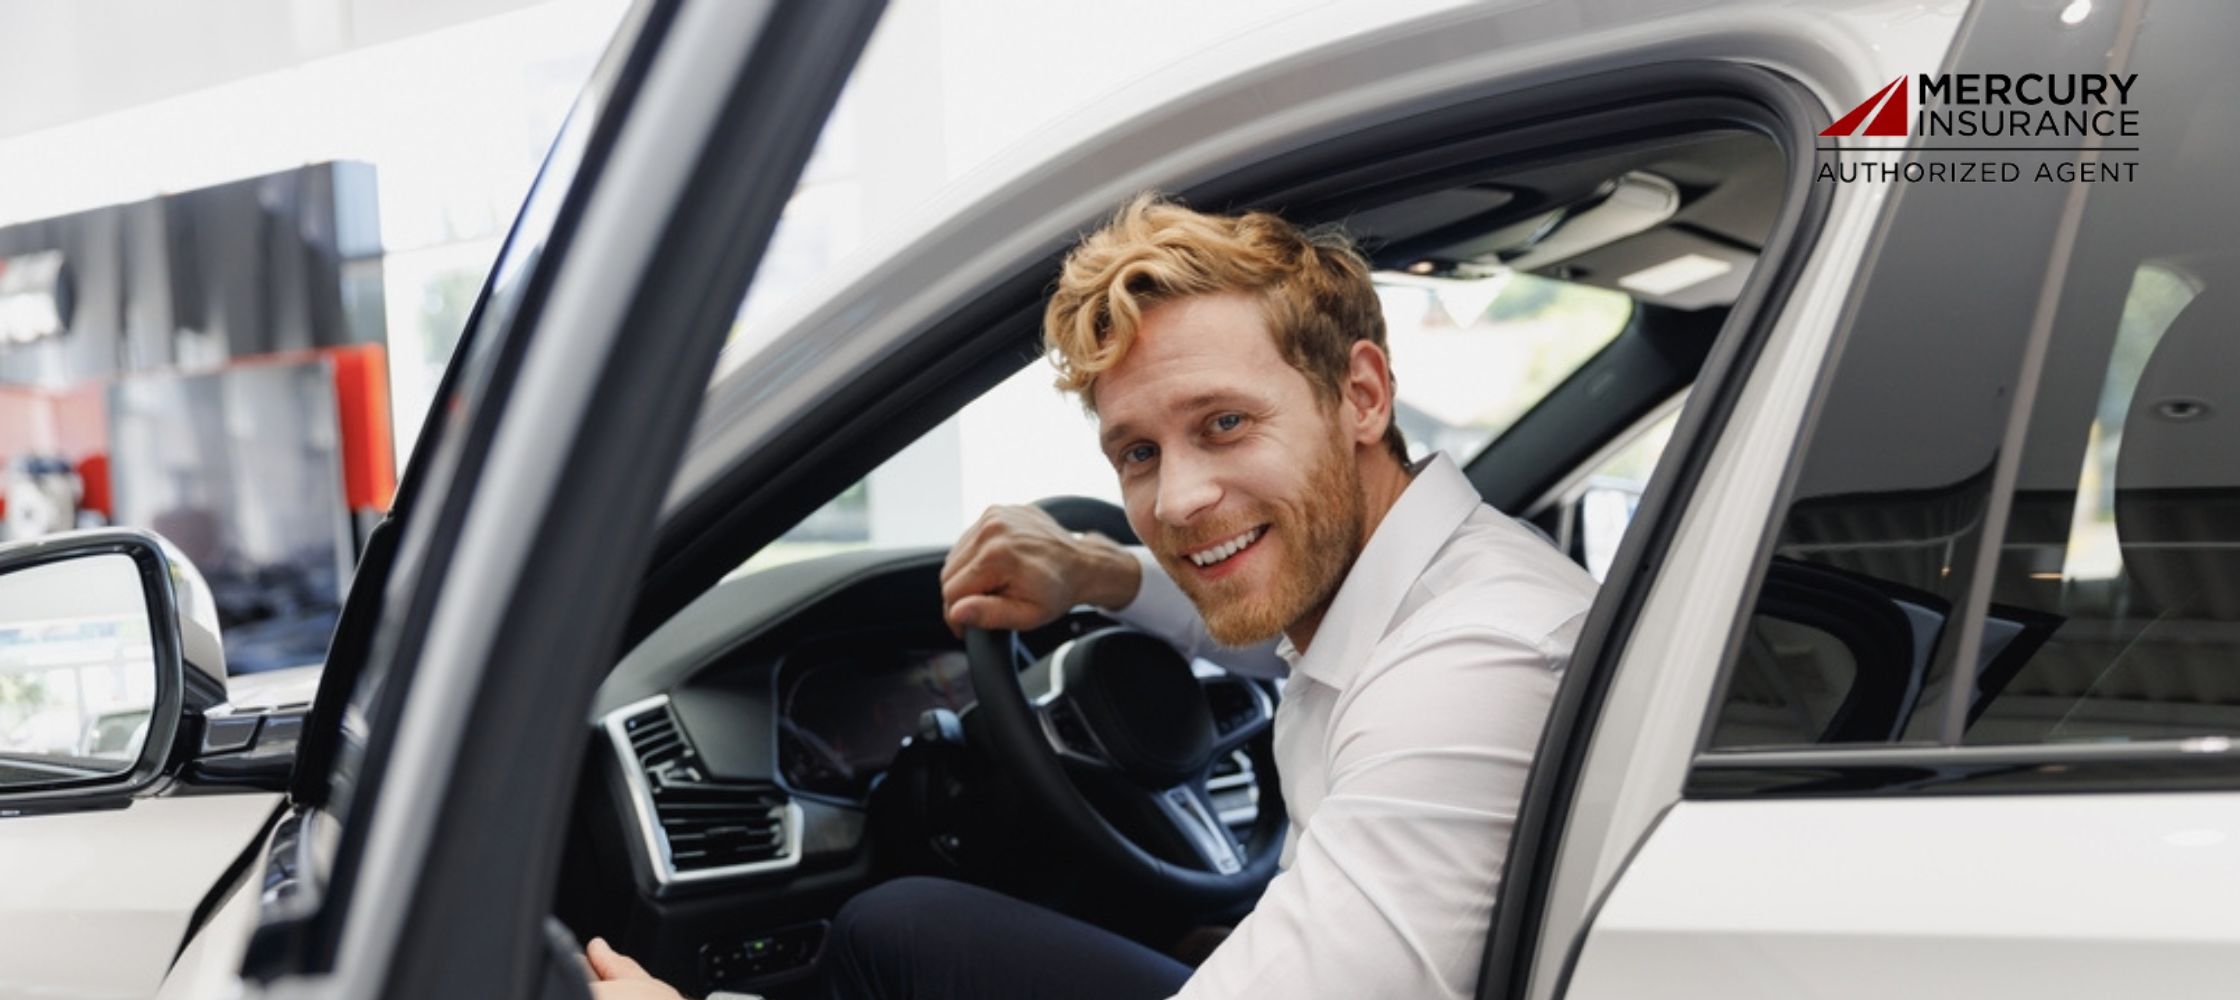 Your Credit Score: The Secret Factor in Auto Insurance Rates